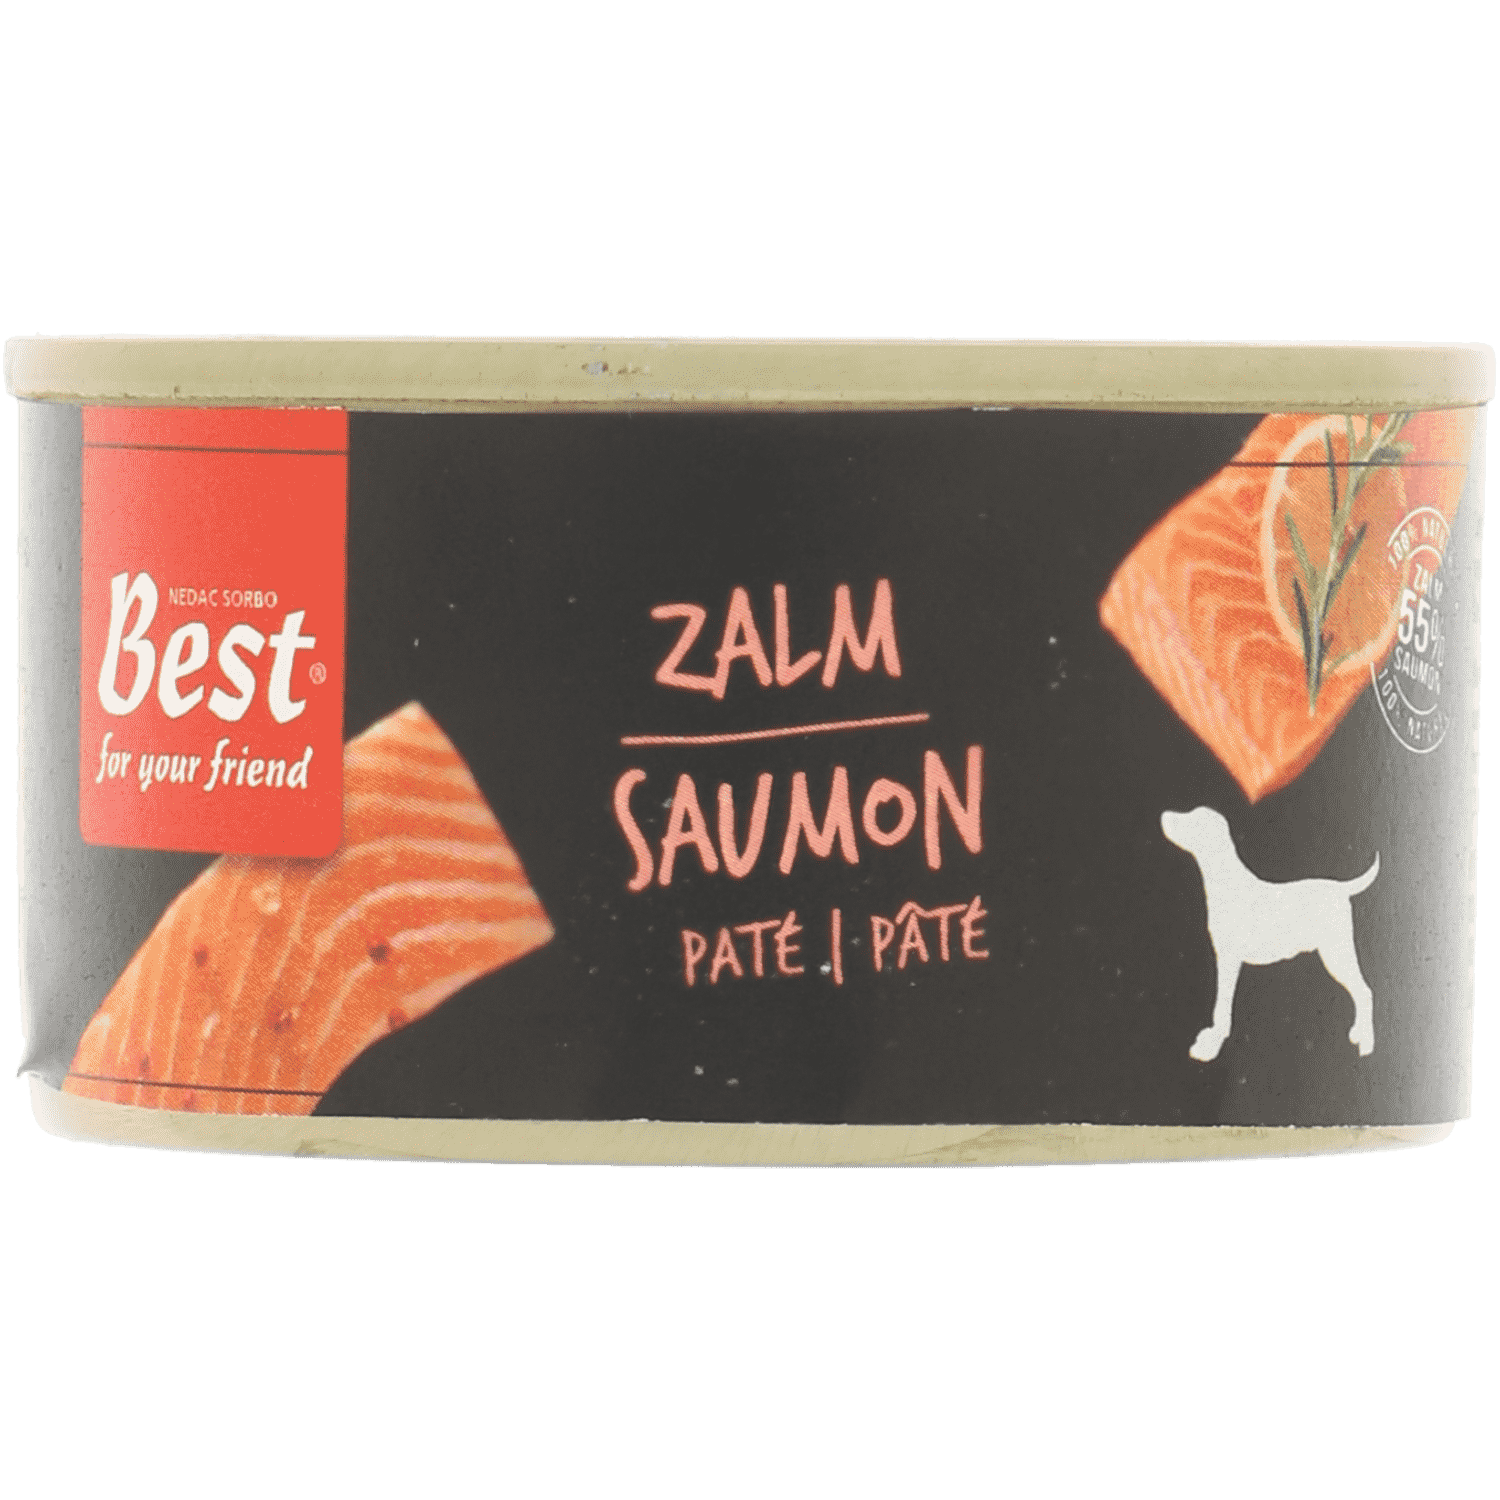 Steamed salmon meal, 95 g